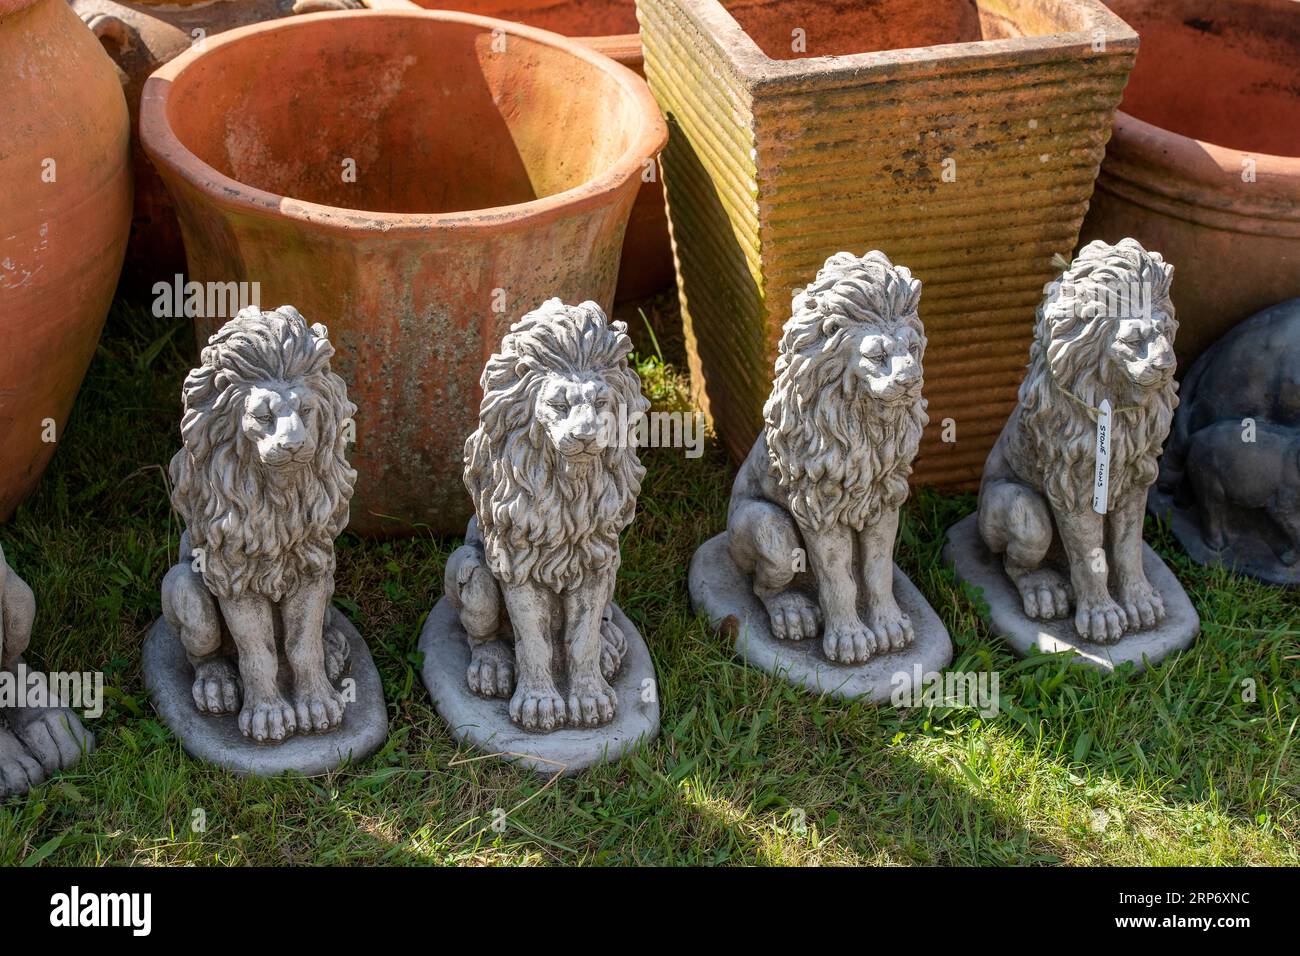 garden terracotta planters and stone lions on display at a garden fair or garden centre for use as decoration in the garden. sculptures and plant pots Stock Photo